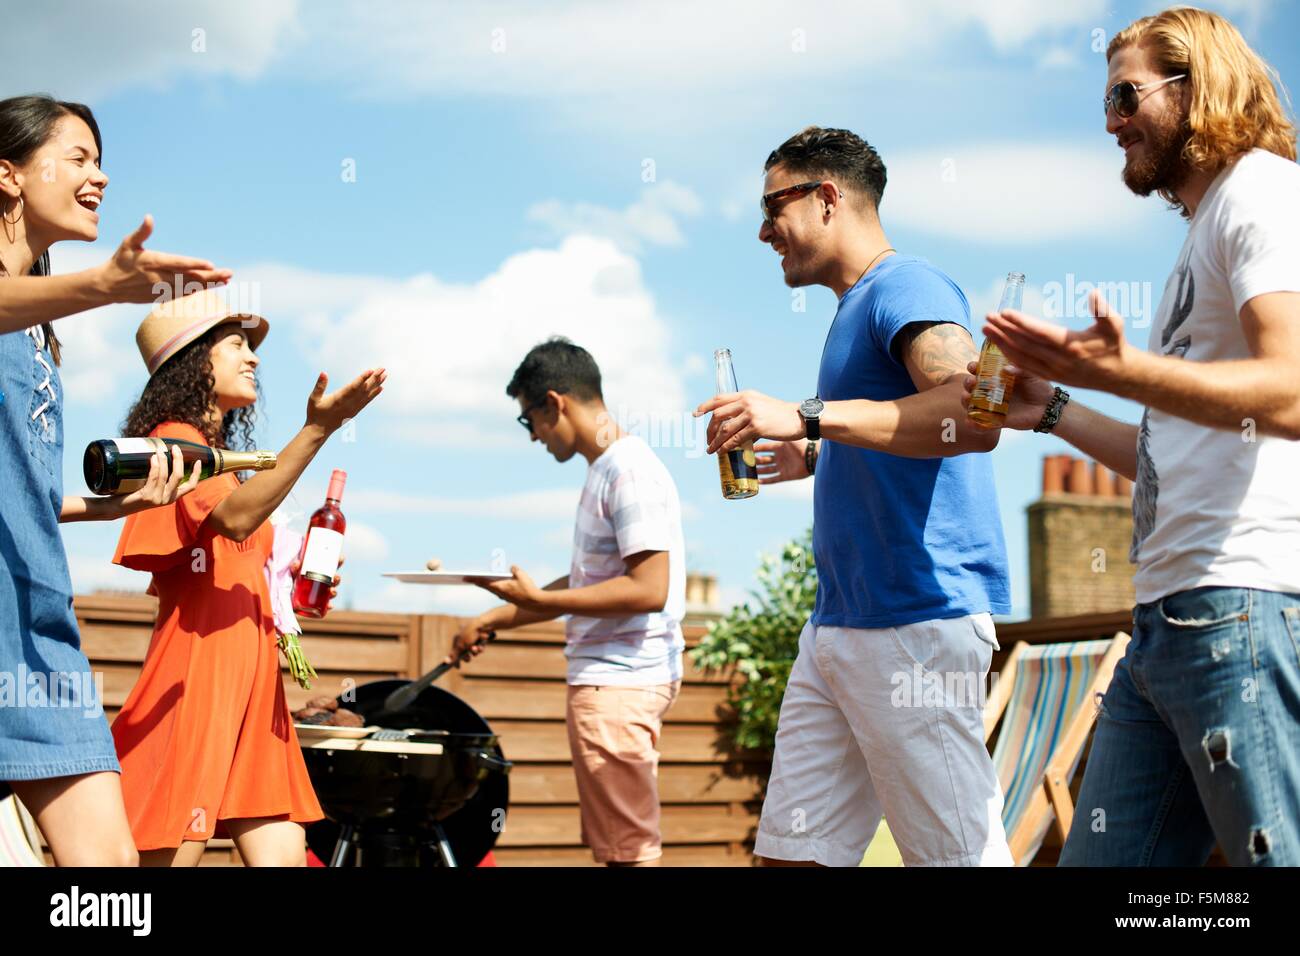 Female and male friends greeting at rooftop barbecue Stock Photo